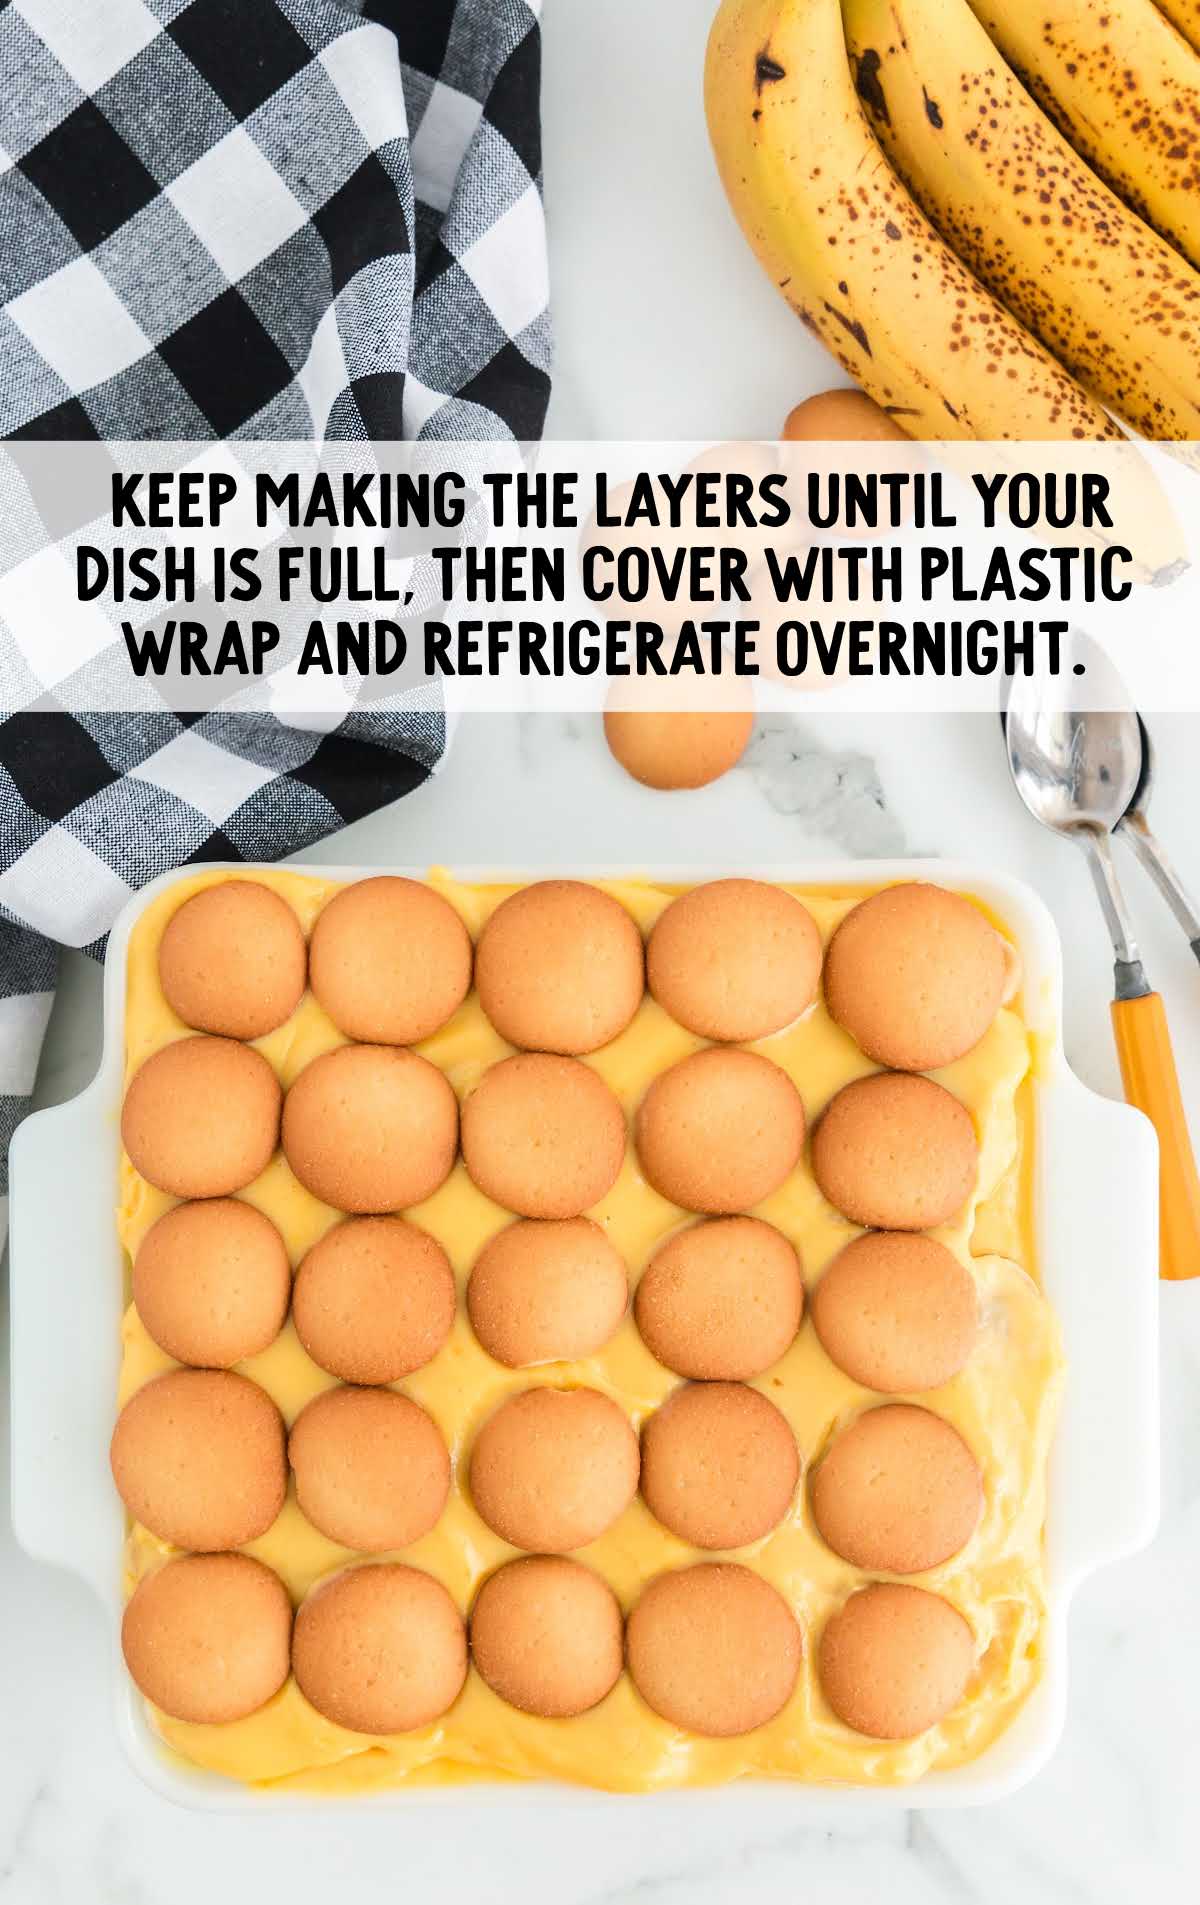 make layer until dish is full and cover with plastic wrap